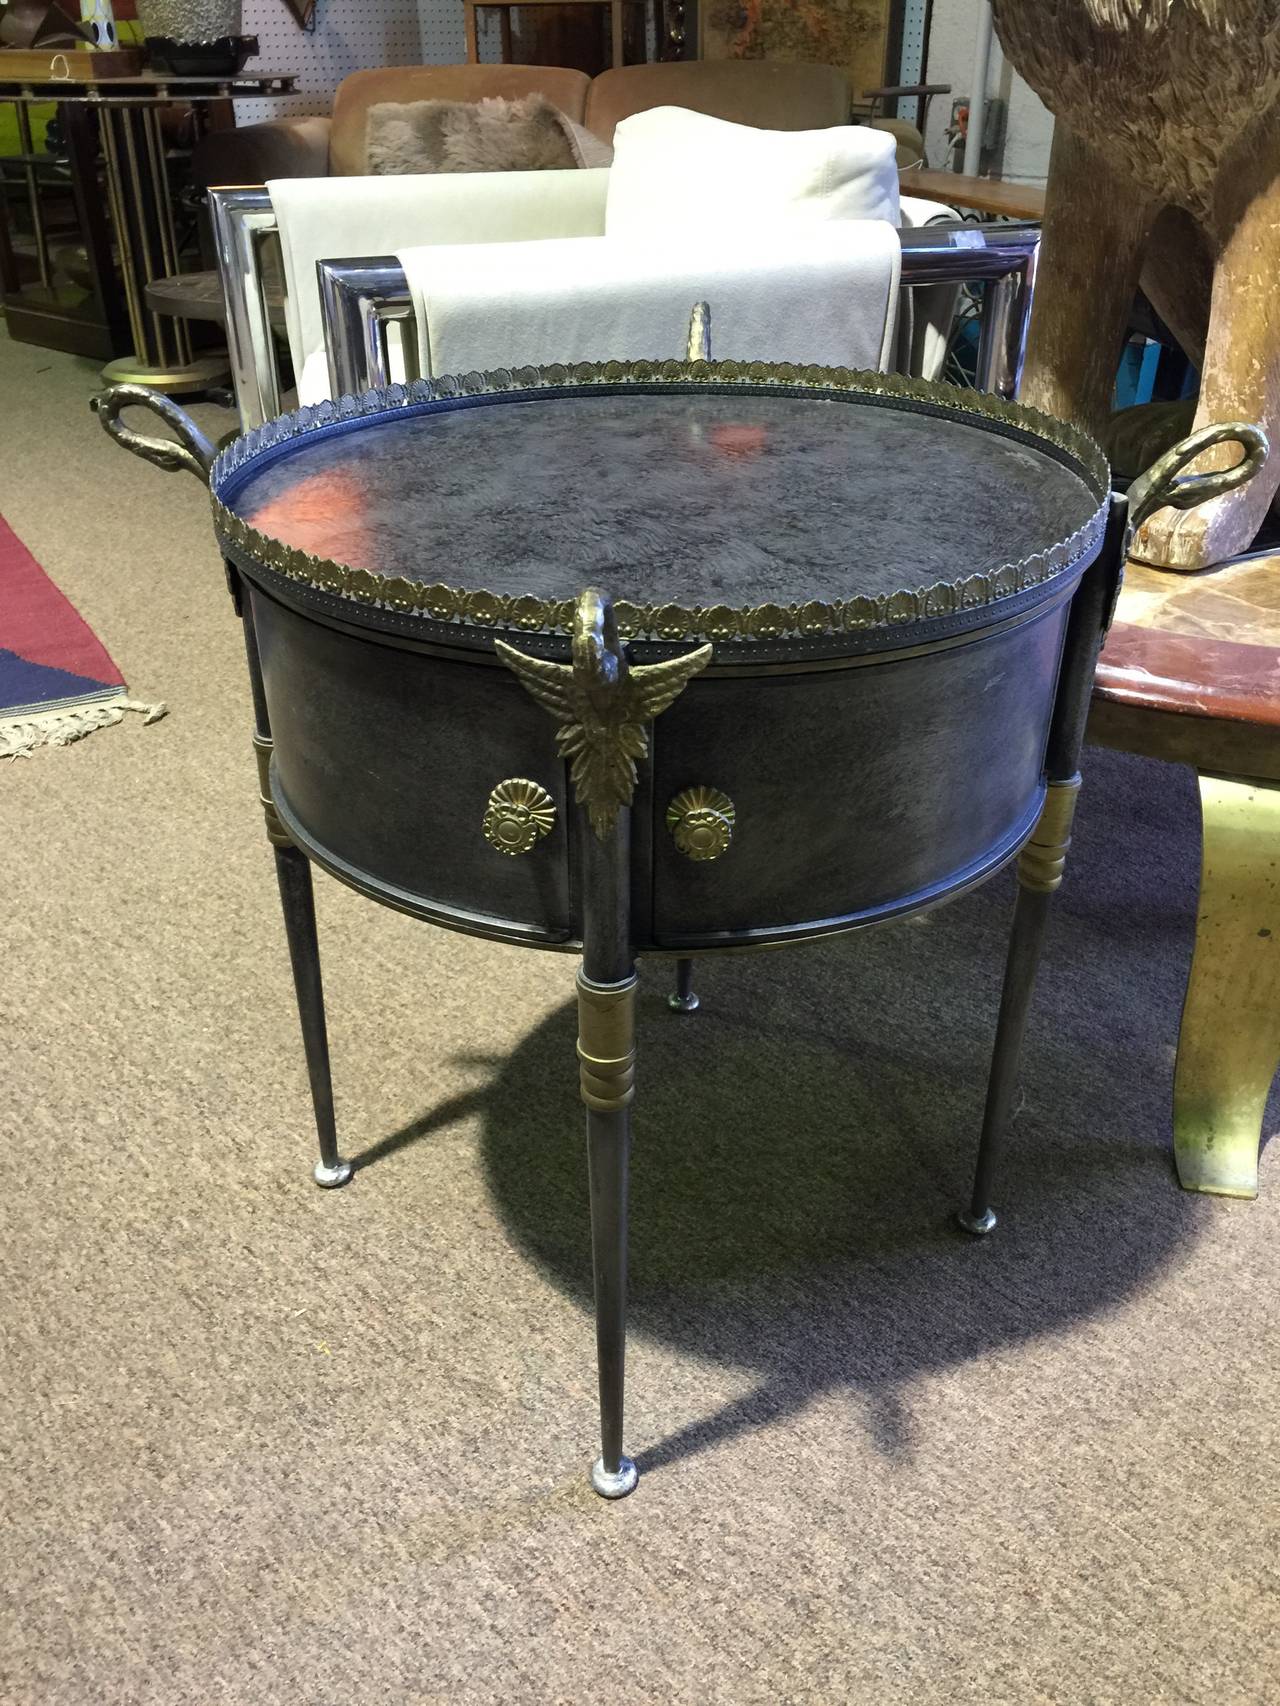 Exceptional Mid-Century tray table by Trouvailles. Comprised of a sculptural steel drum form with brass swans on each corner and removable tray top. Signed 